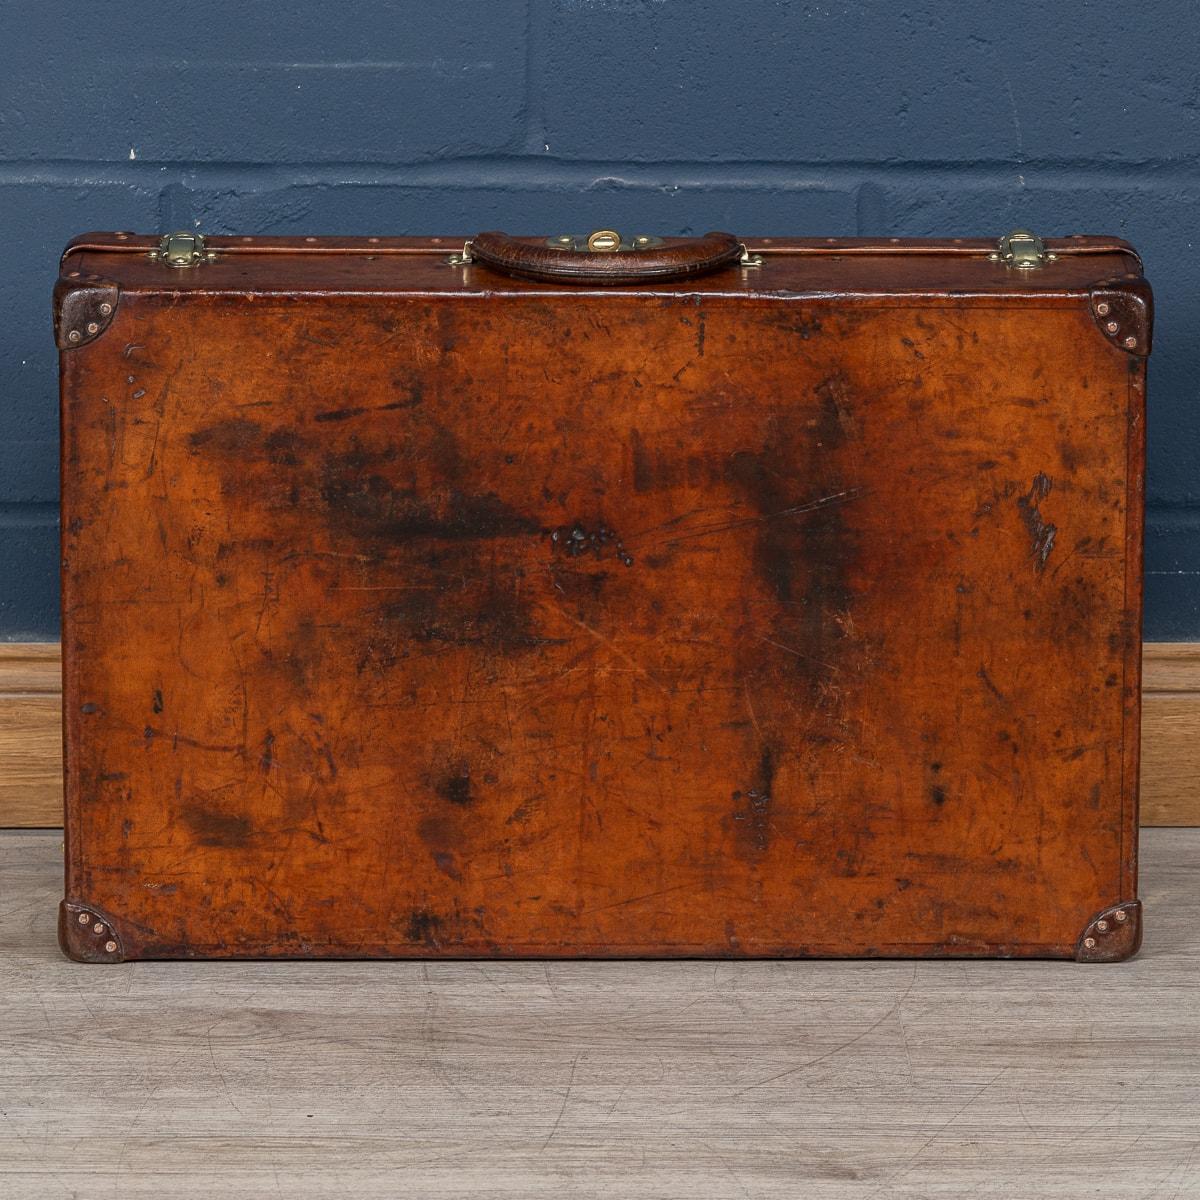 20th Century Louis Vuitton Suitcase In Natural Cow Hide, France c.1910 For Sale 1